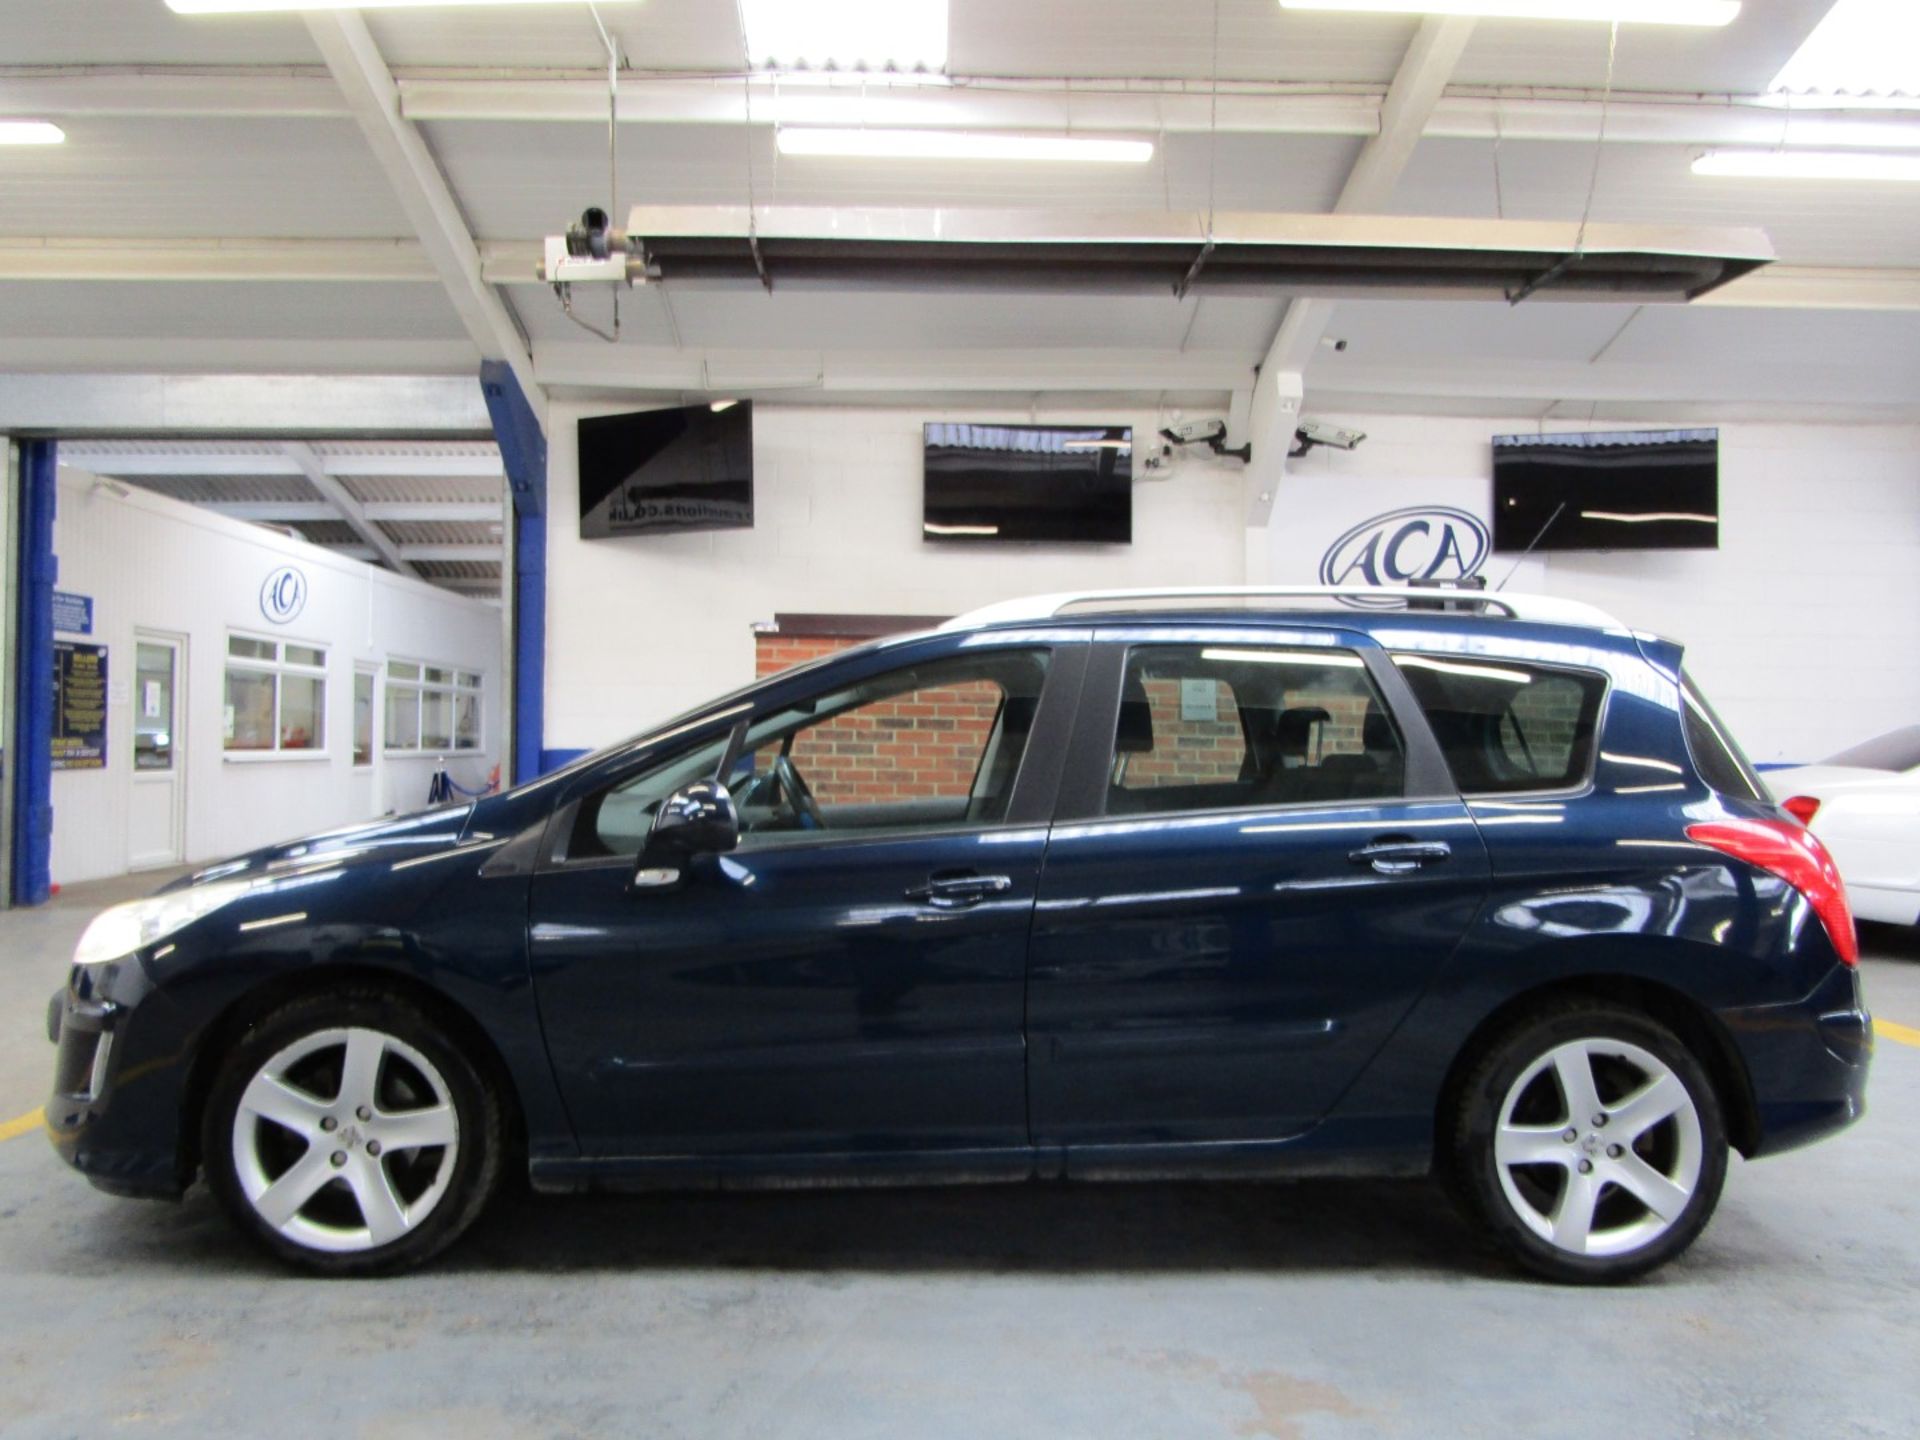 09 09 Peugeot 308 sport SW HDI 110 - Image 28 of 28